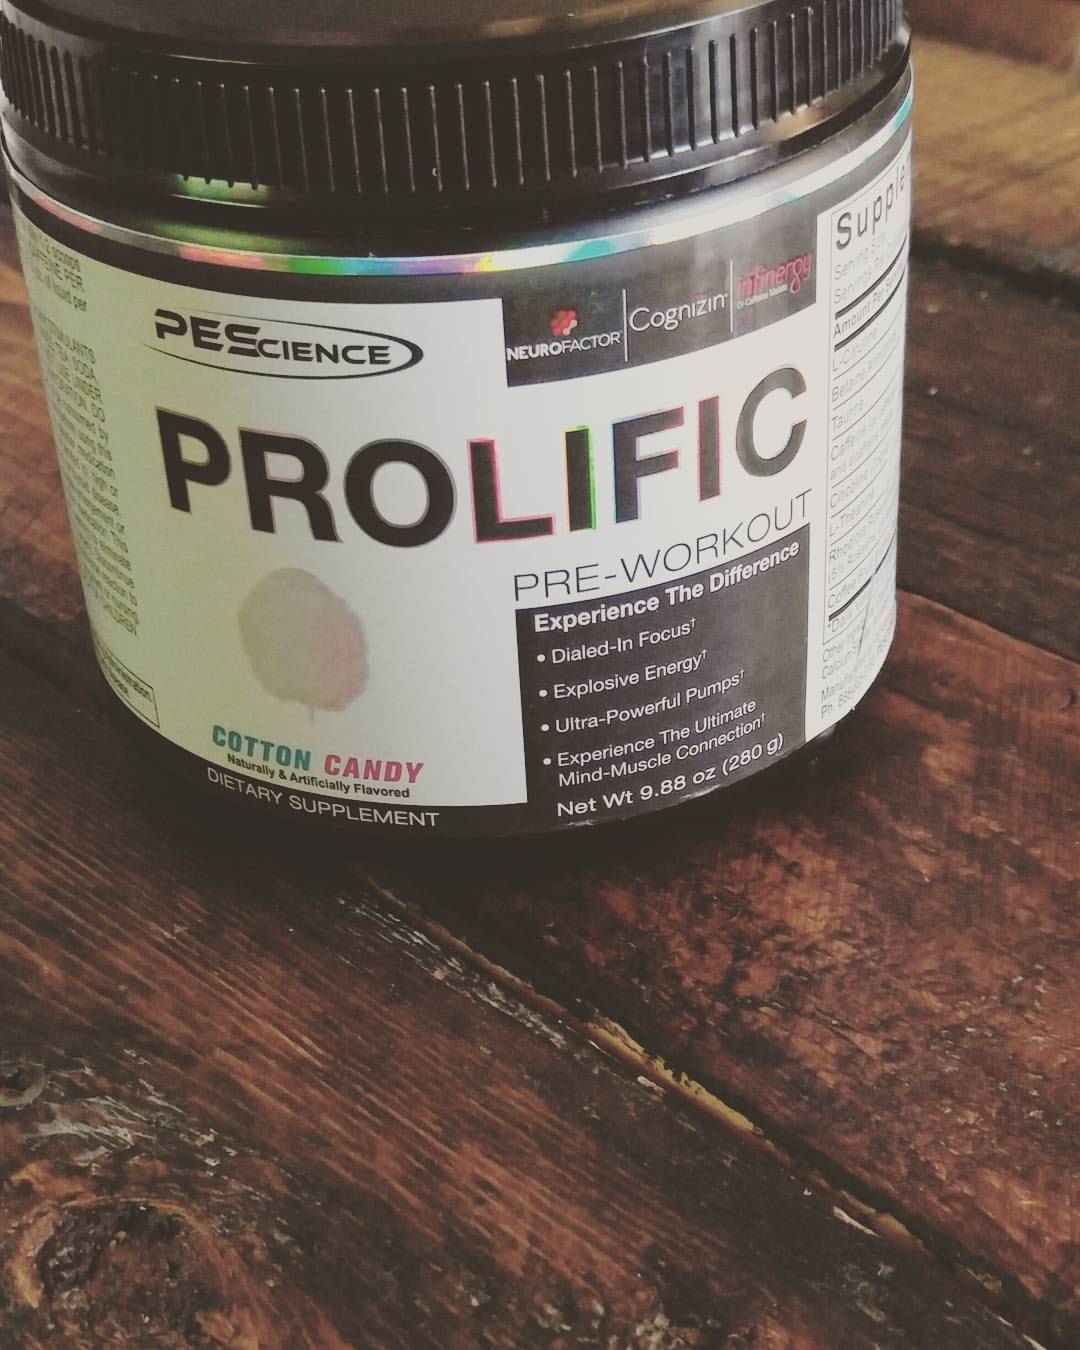 Prolific by PEScience instagram